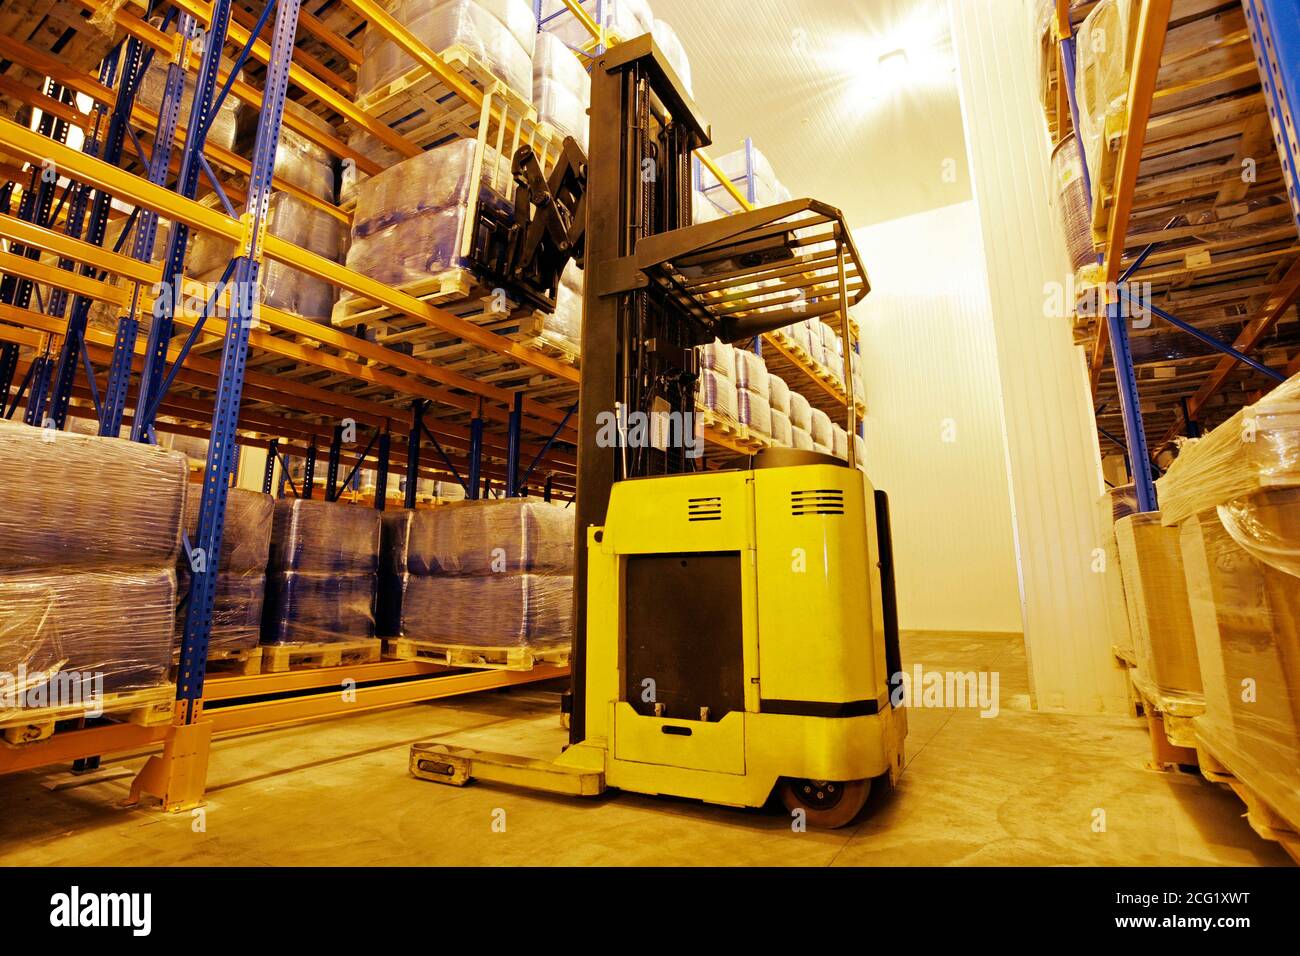 Warehouse storage with yellow forklift Stock Photo